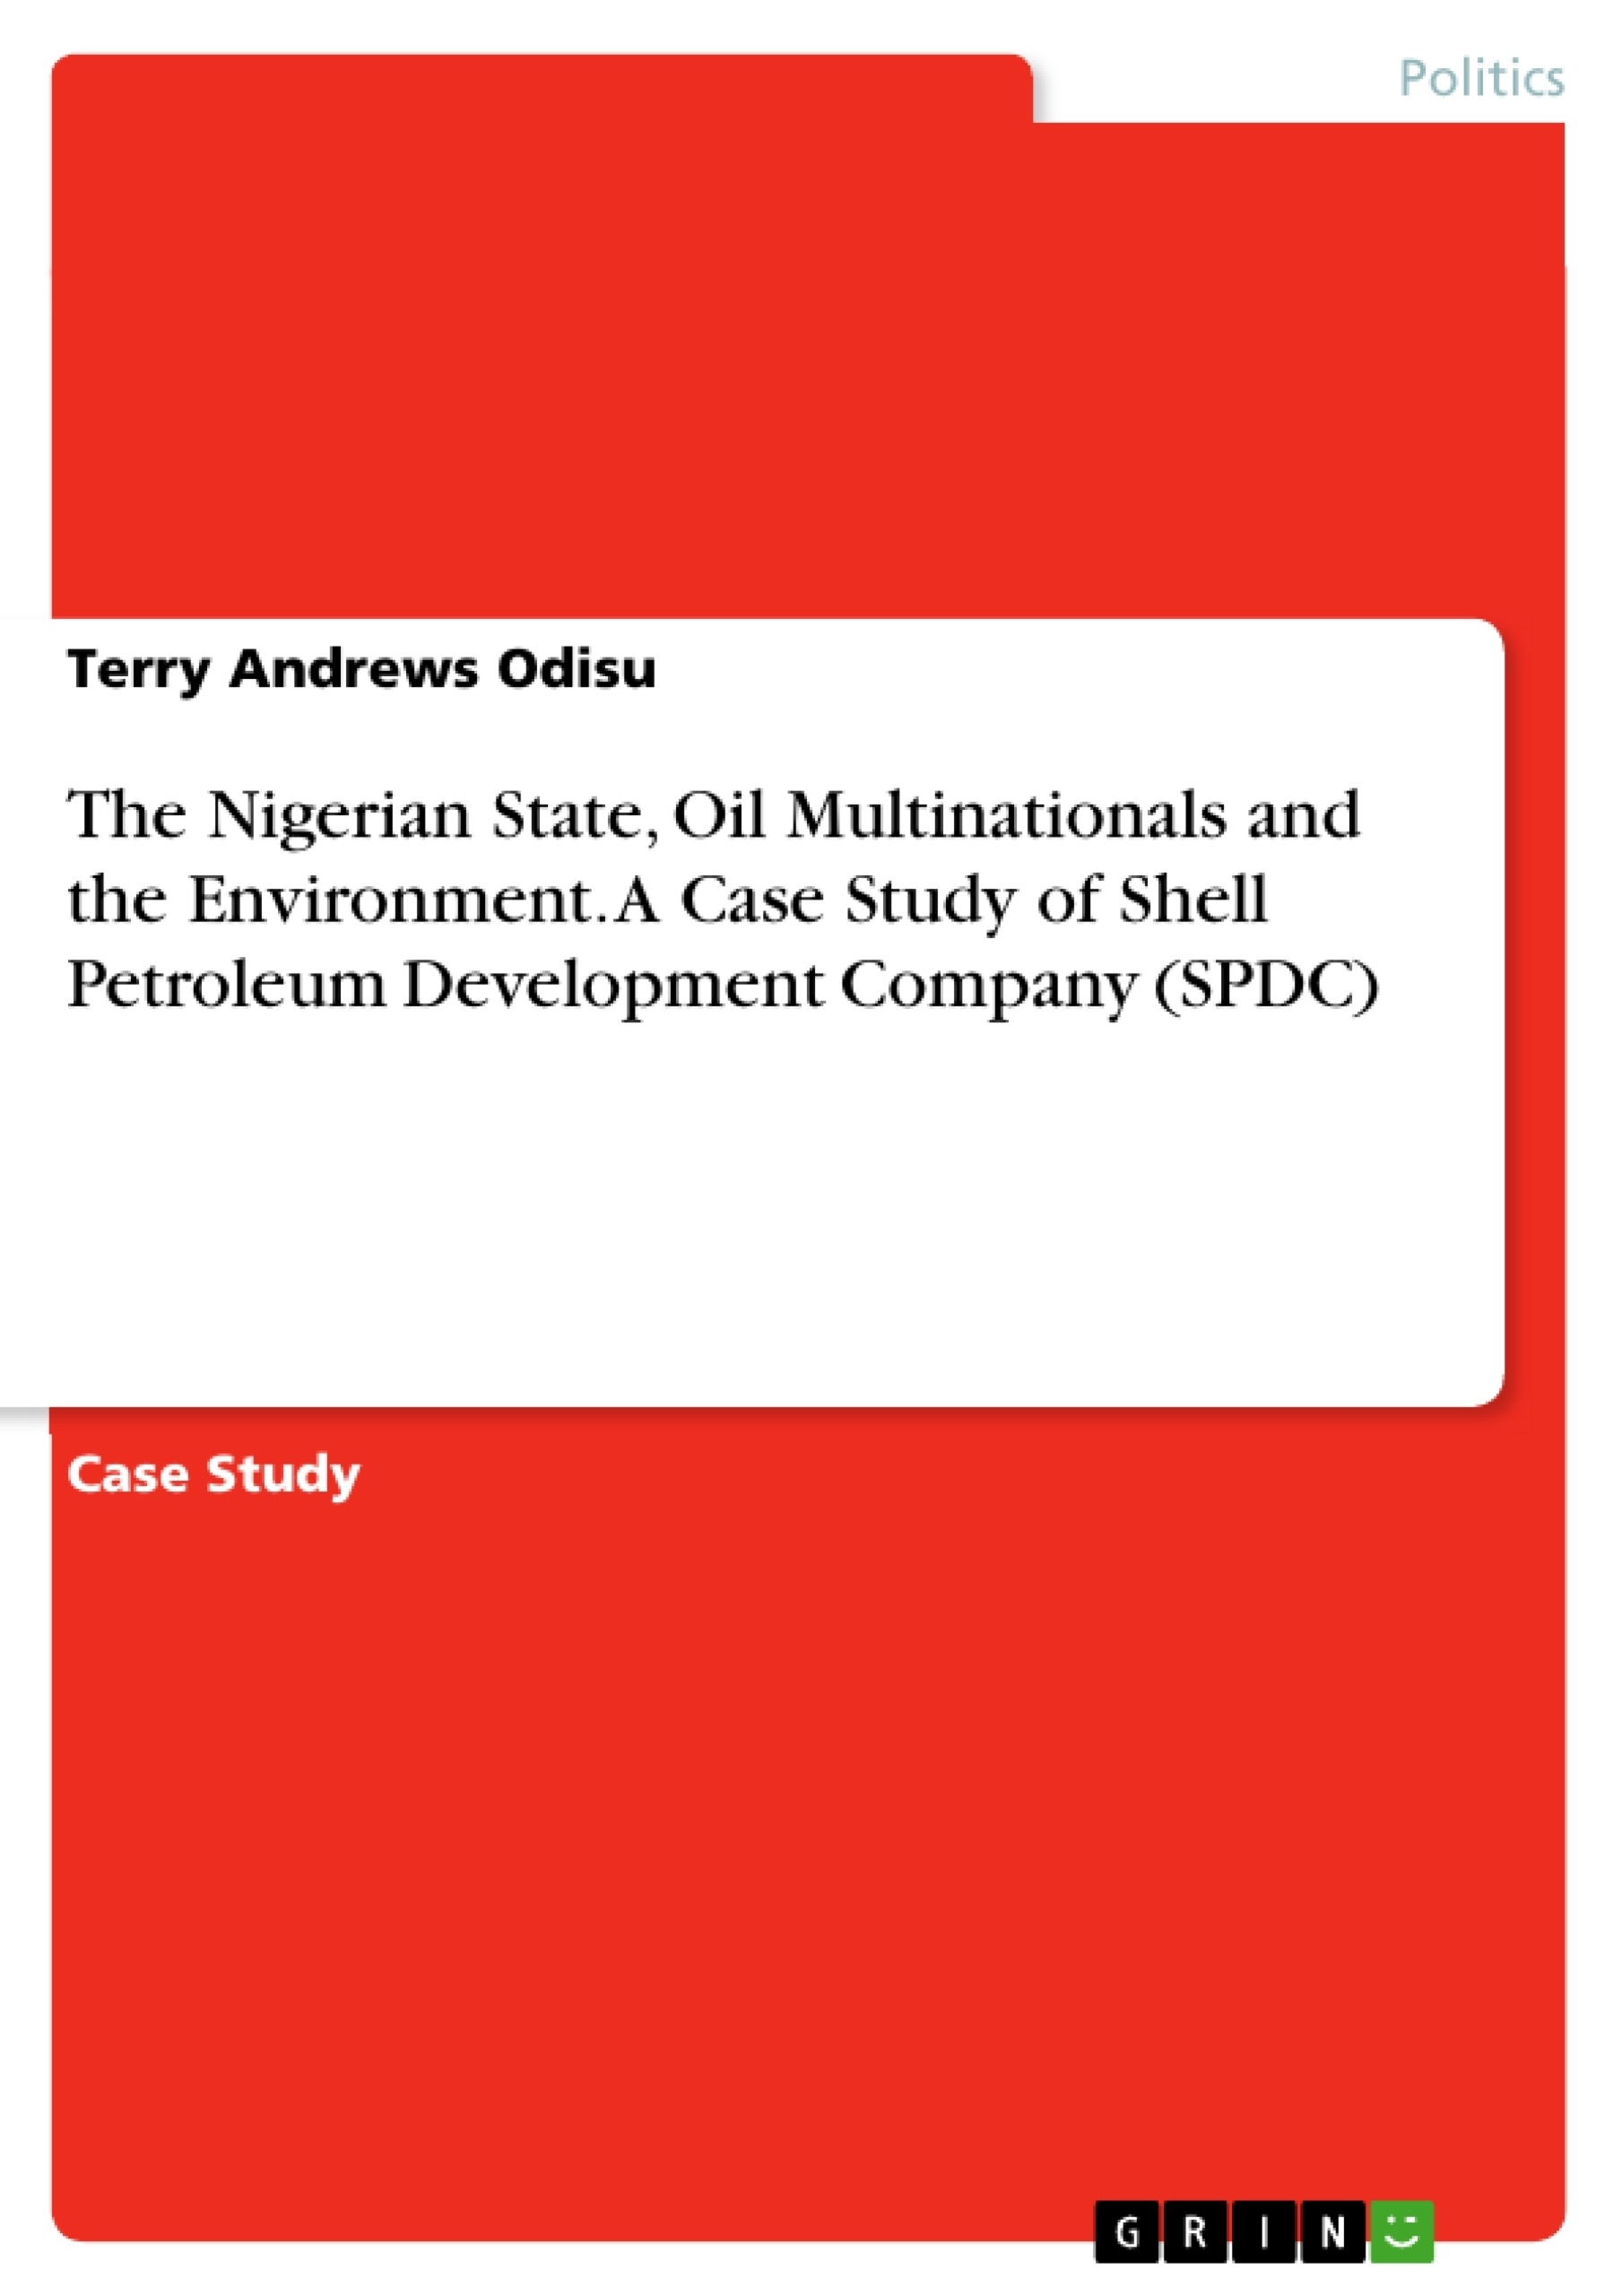 Titel: The Nigerian State, Oil Multinationals and the Environment. A Case Study of Shell Petroleum Development Company (SPDC)